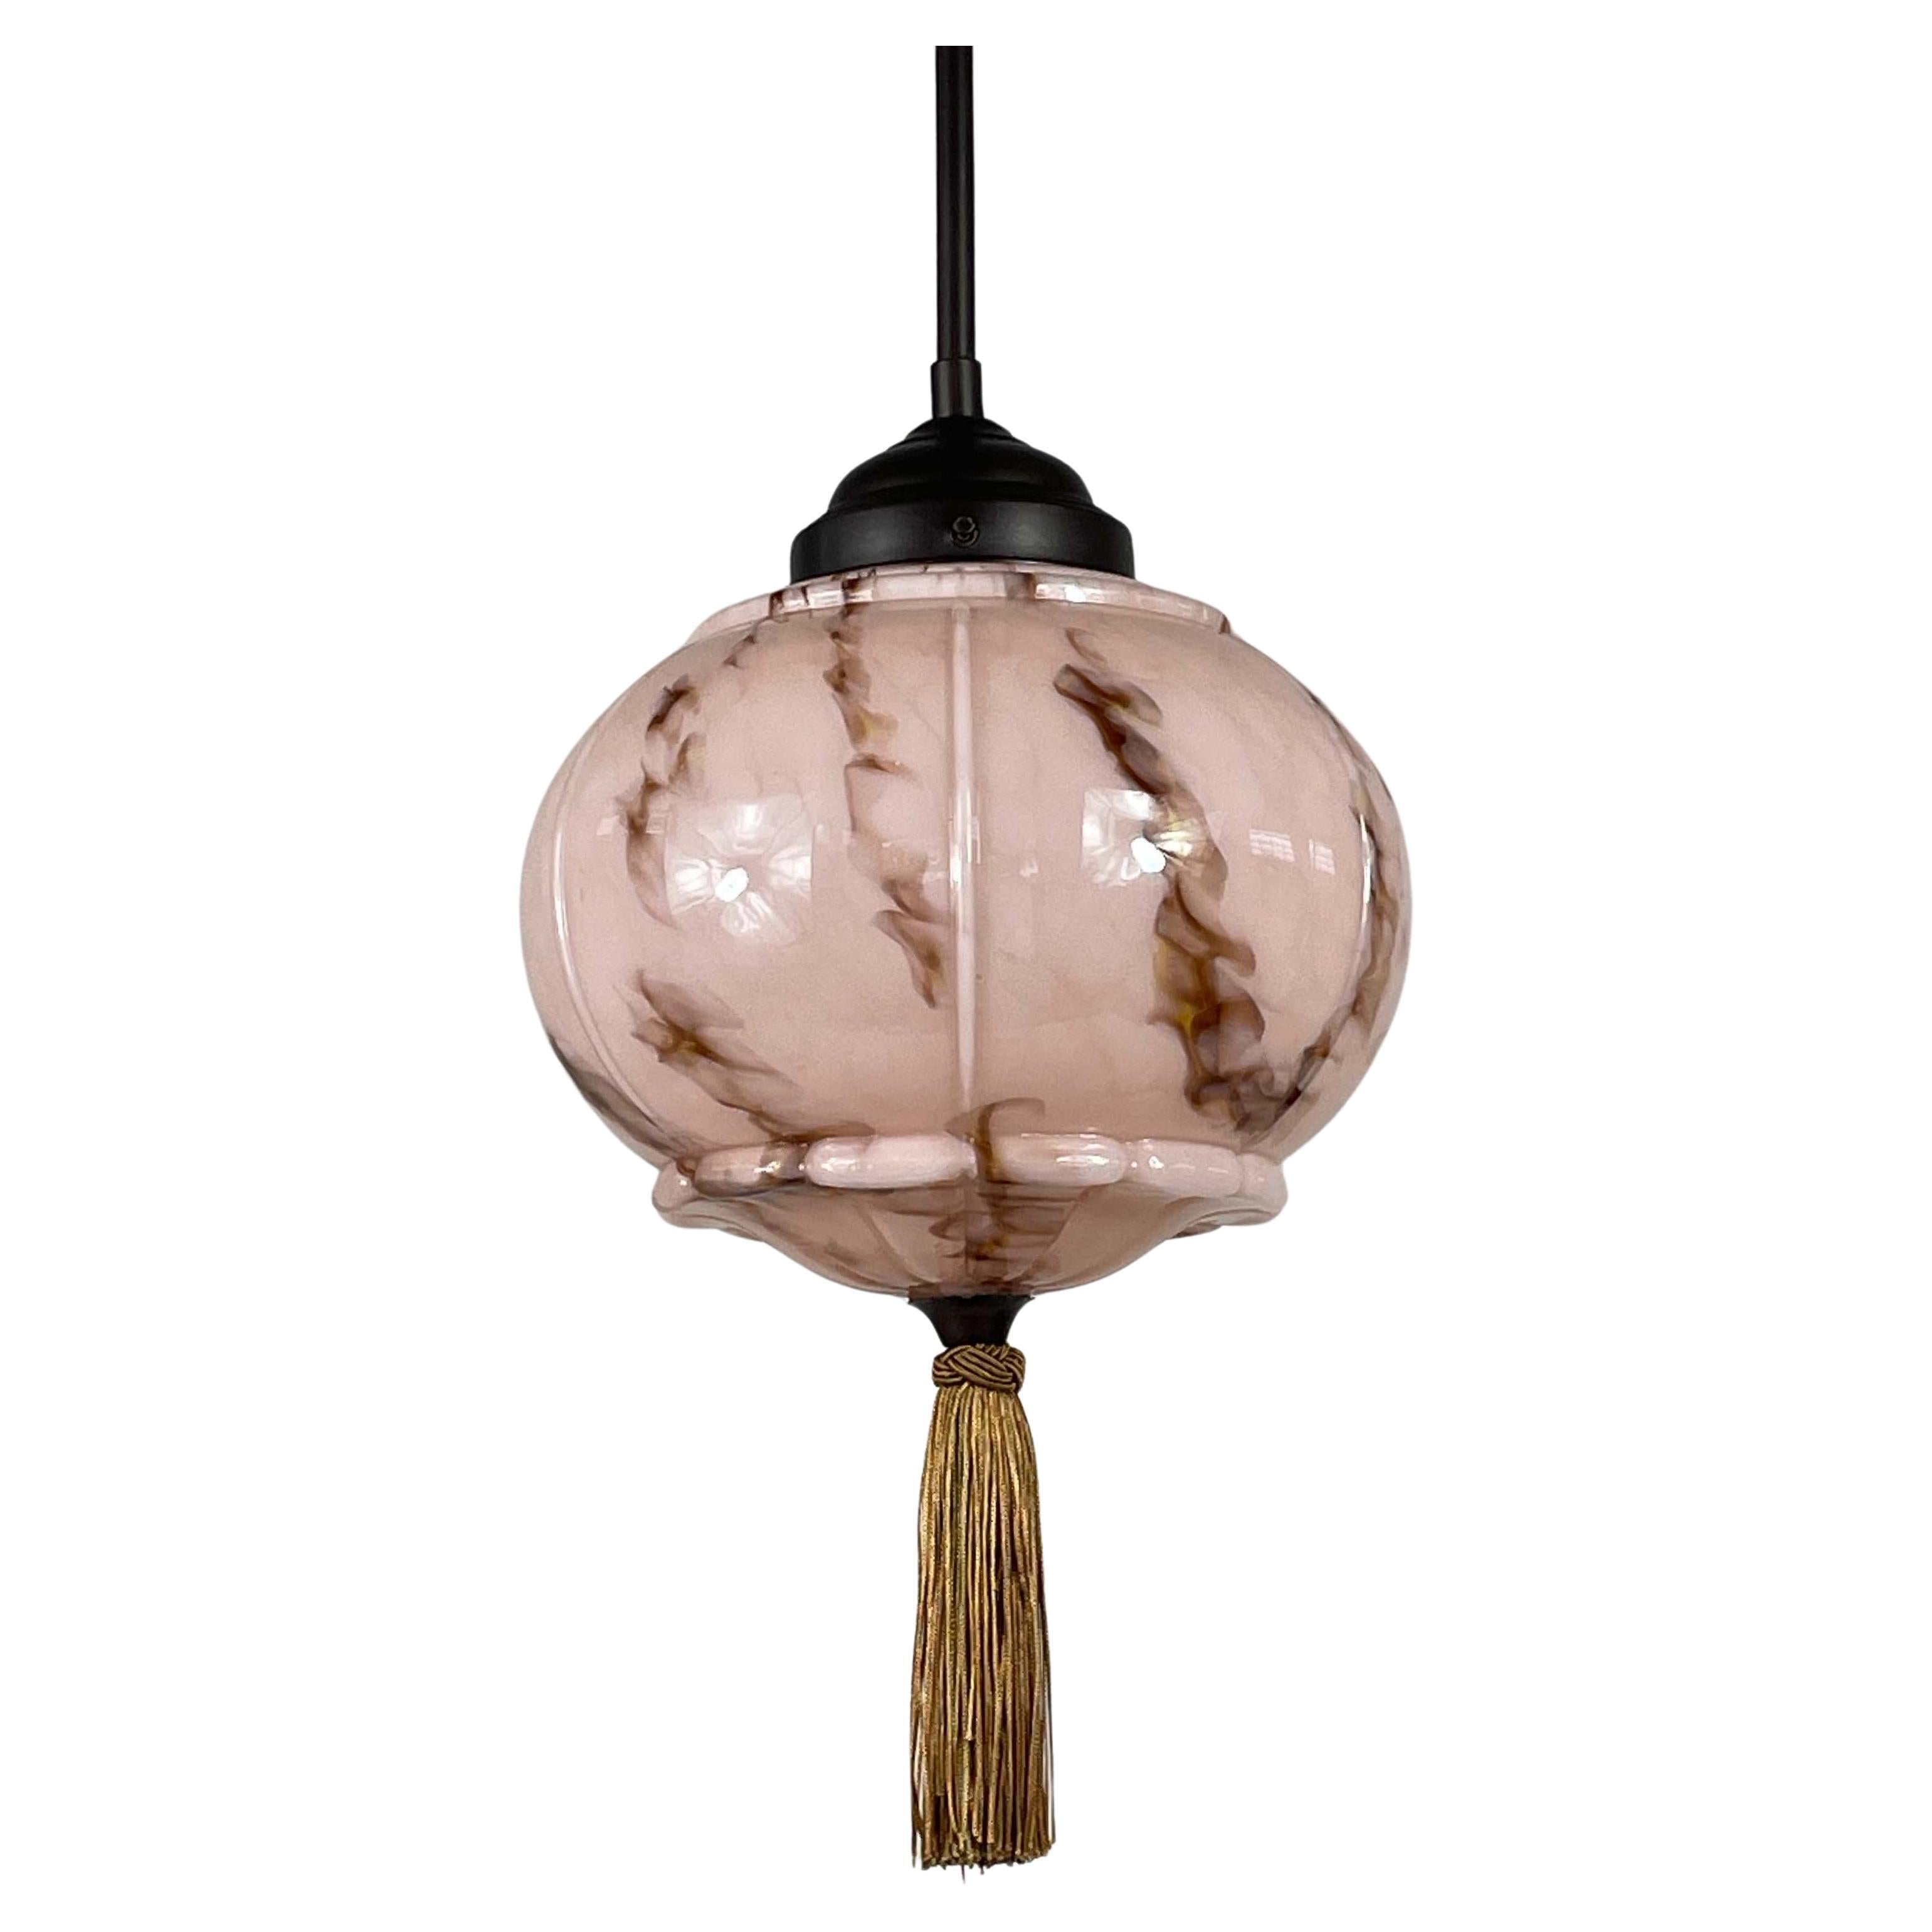 Marbled Pale Rose Opaline & Bronzed Pendant with Tassel, Germany 1920s 1930s For Sale